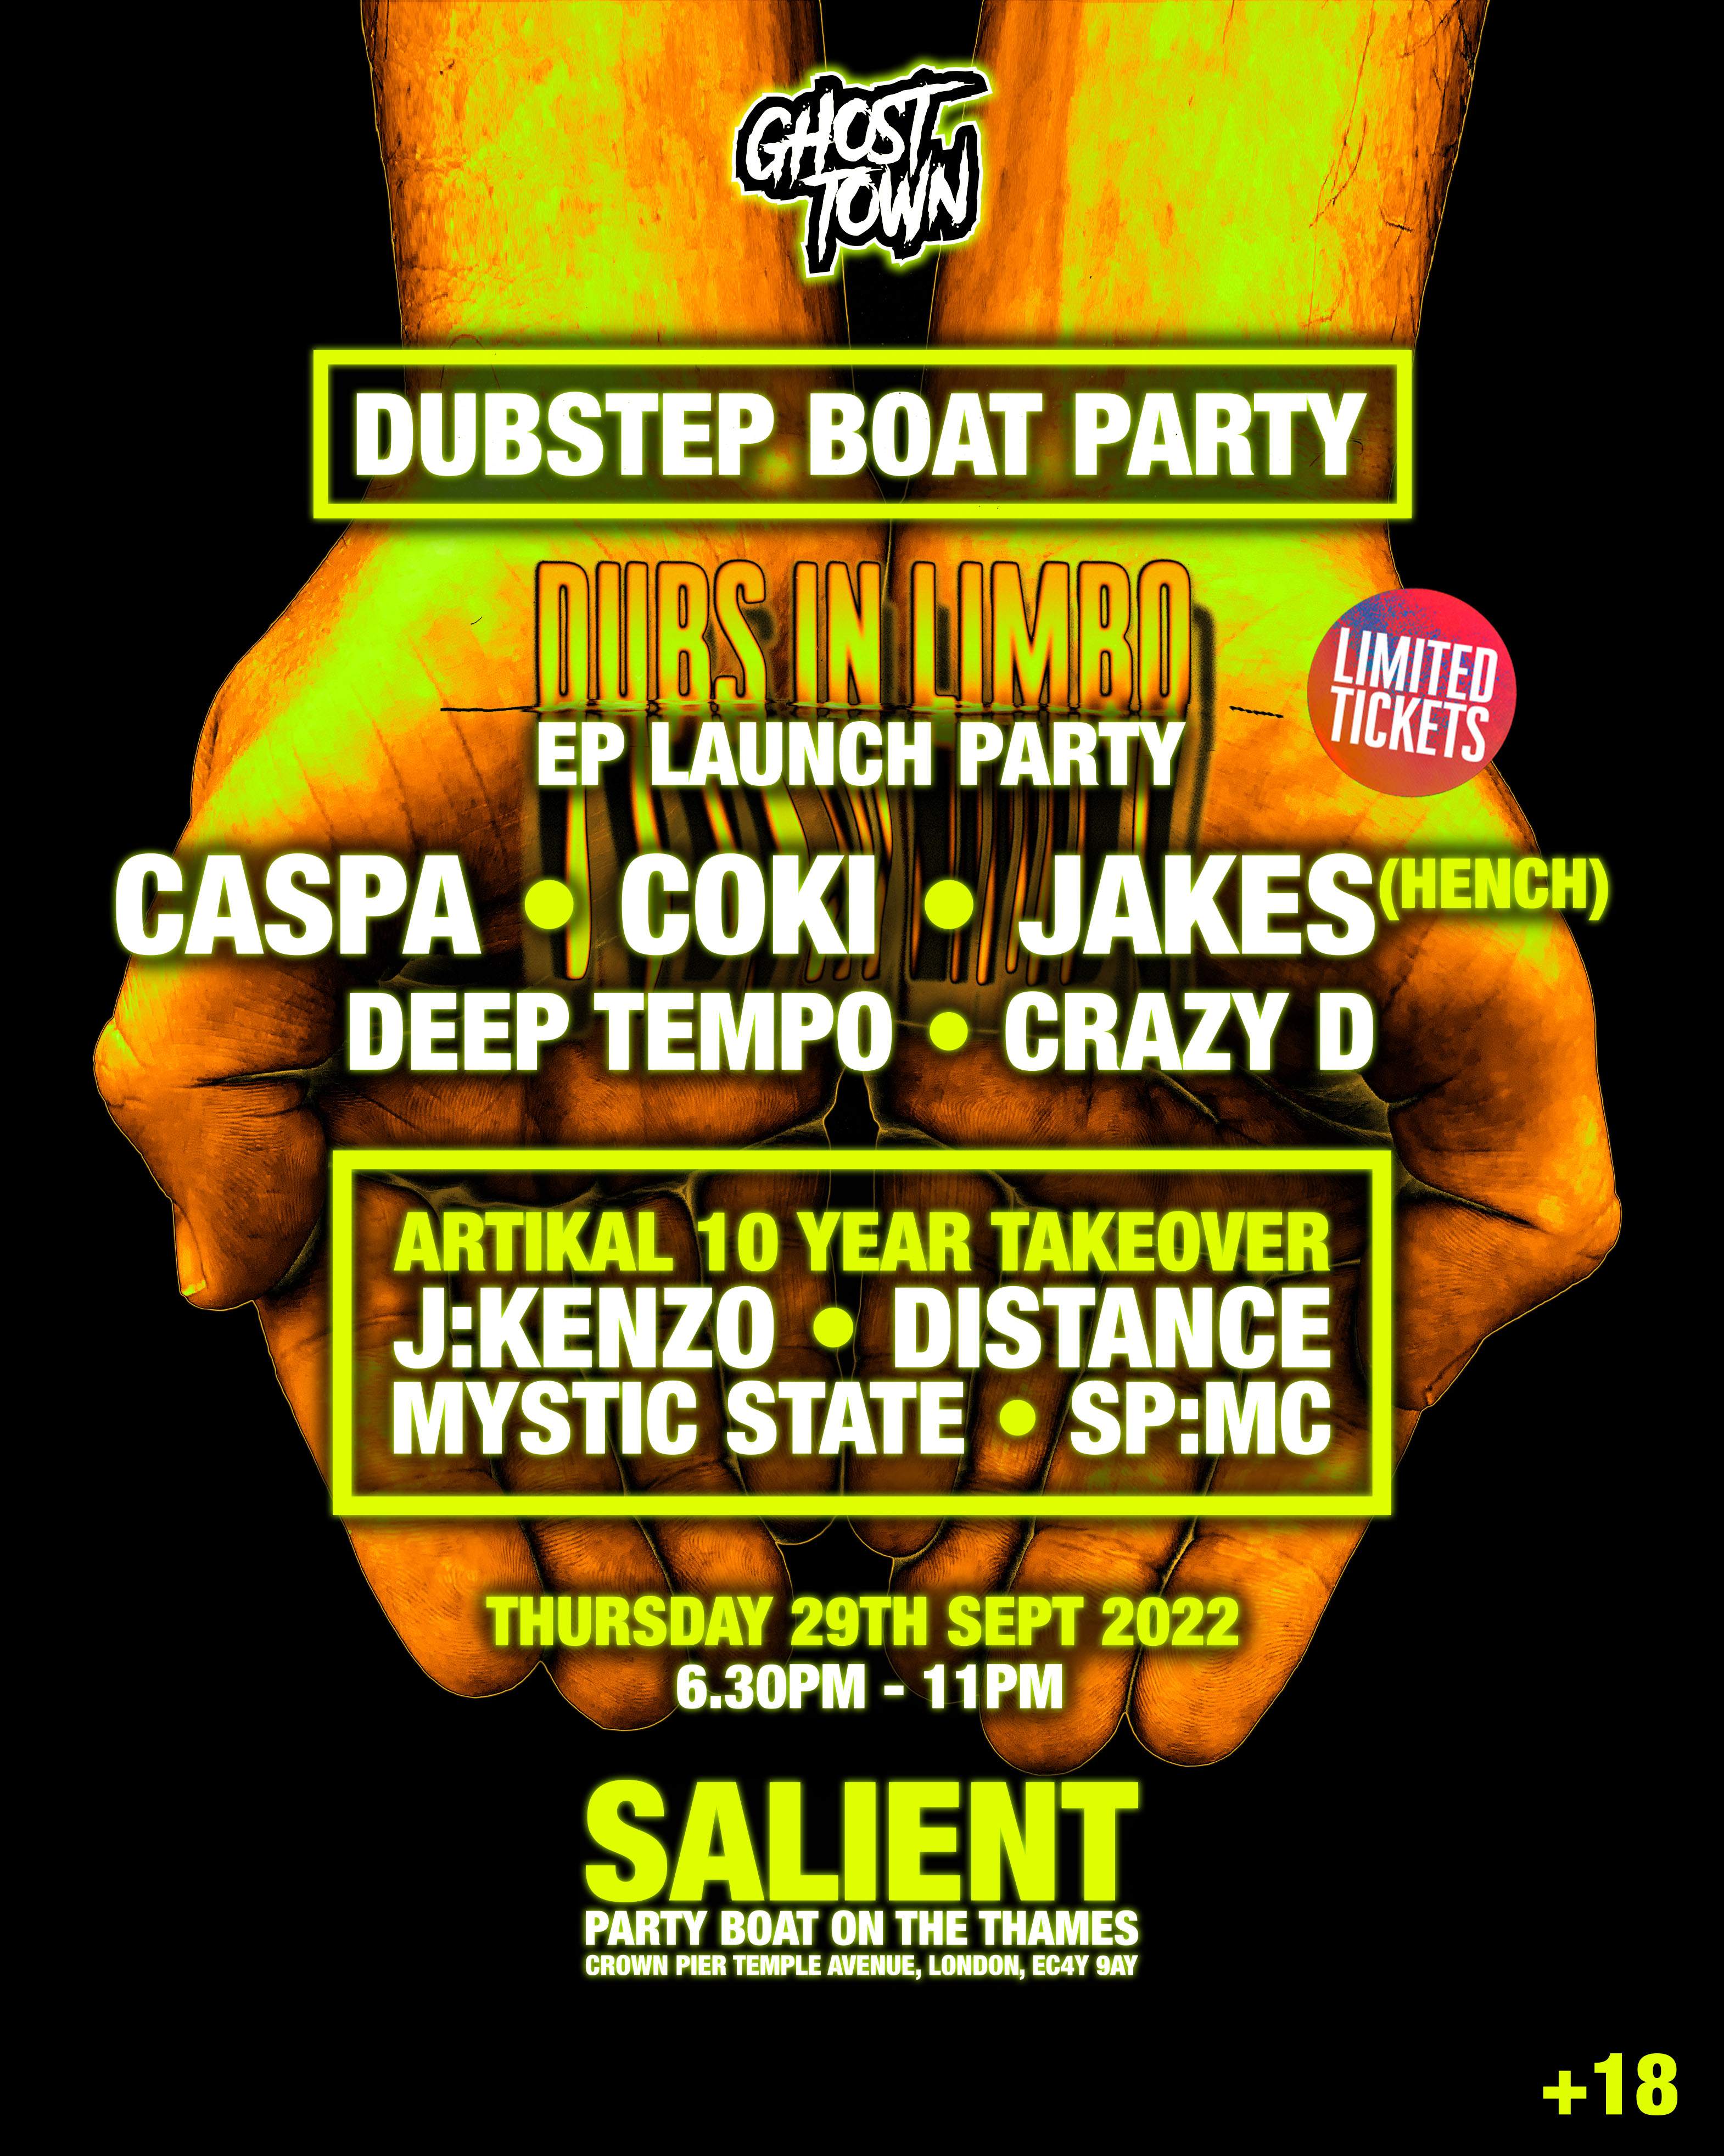 Dubstep Boat Party London - フライヤー表